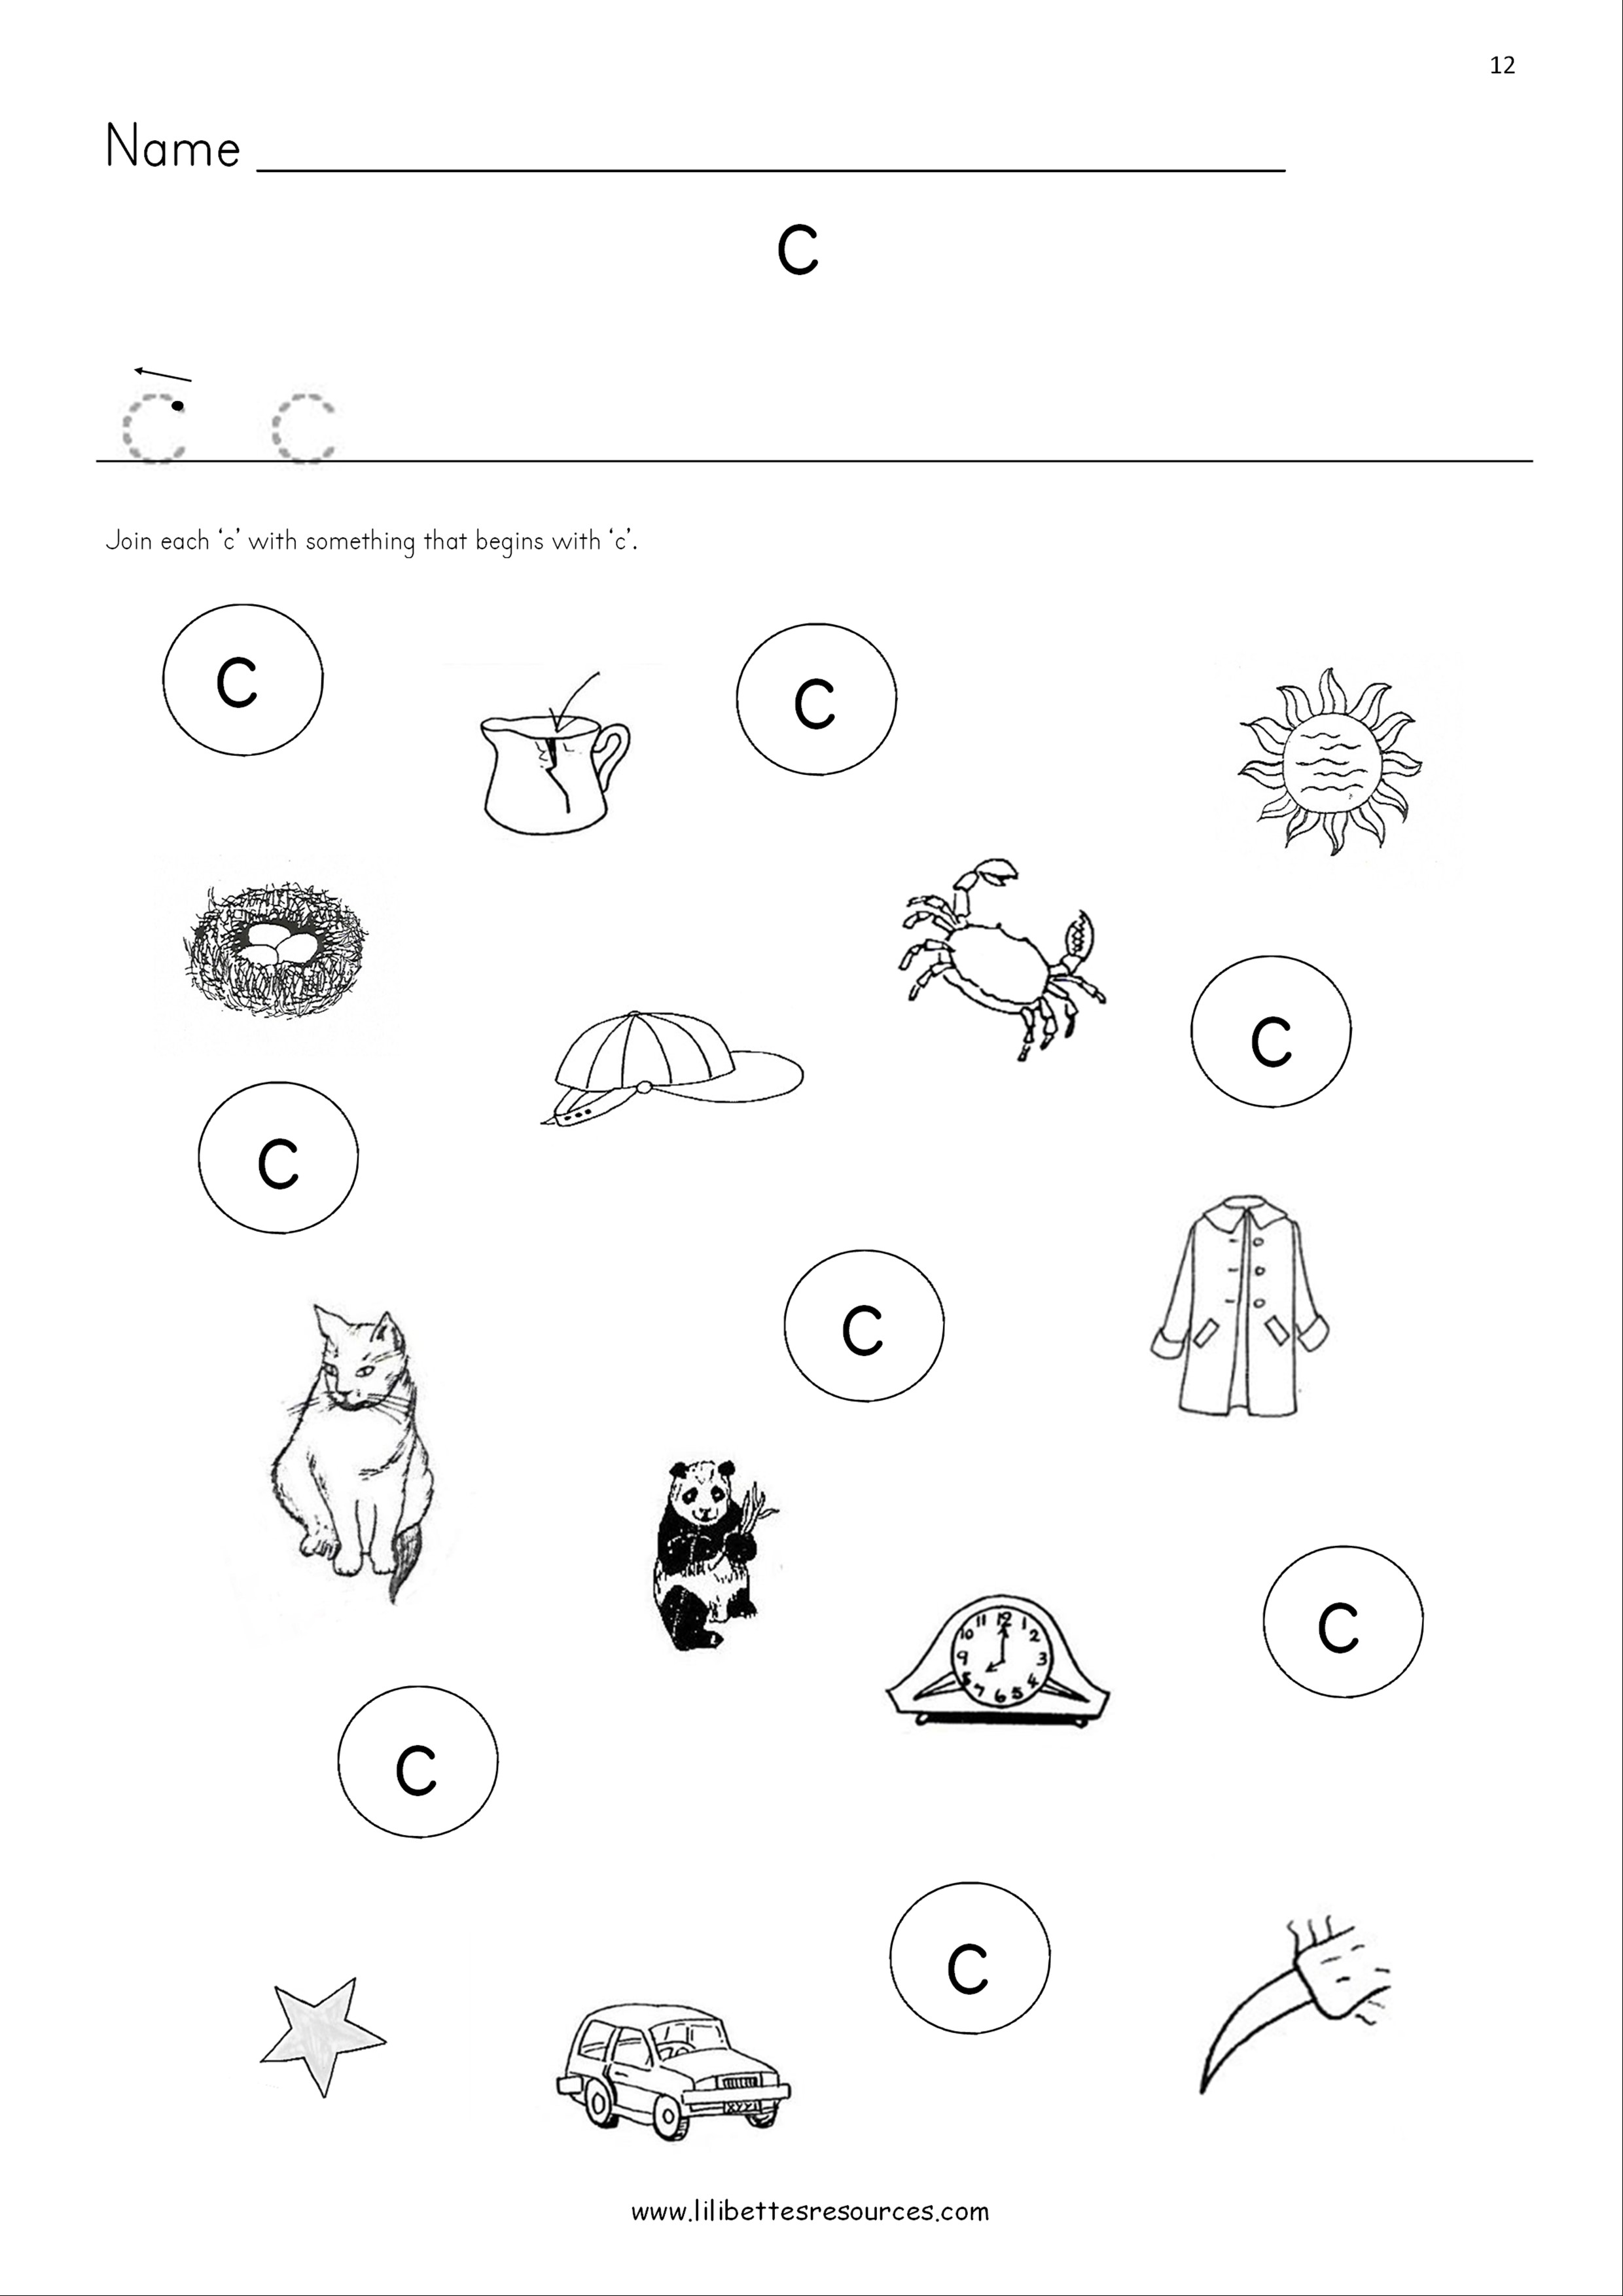 initial-sounds-worksheets-sound-it-out-phonics